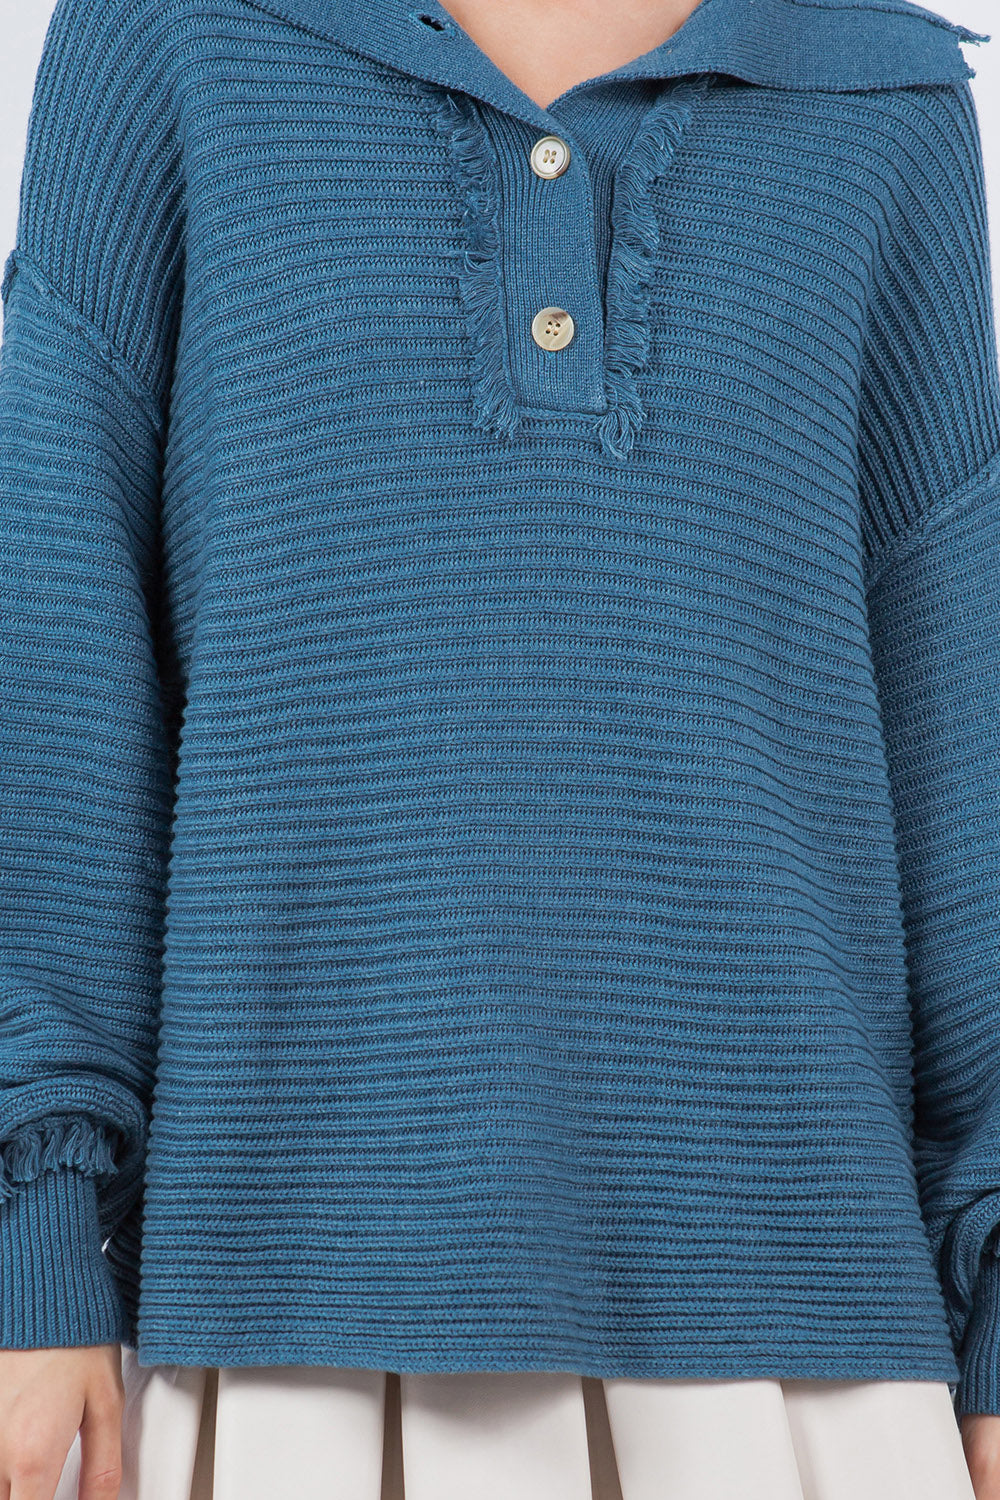 WIDE COLLAR KNITTED SWEATER PULLOVER TEAL